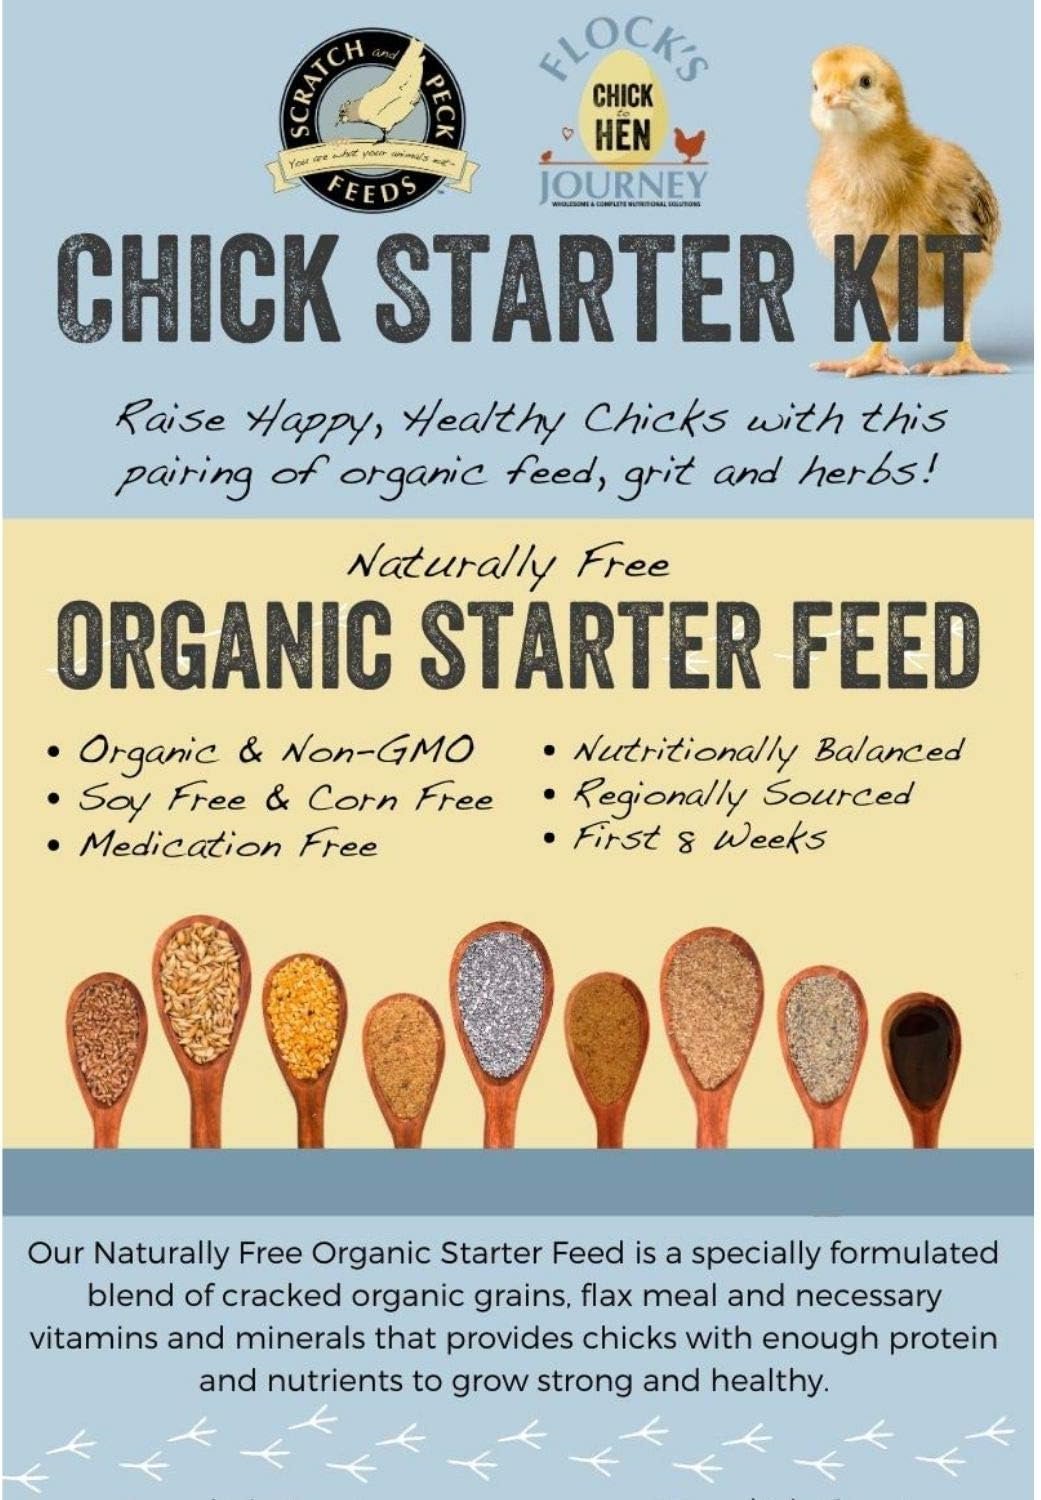 Scratch and Peck Feeds Naturally Free Organic Starter Chick Feed, Chick Grit, and Organic Herbs for Chickens and Ducks - Non-GMO Project Verified, Soy Free and Corn Free